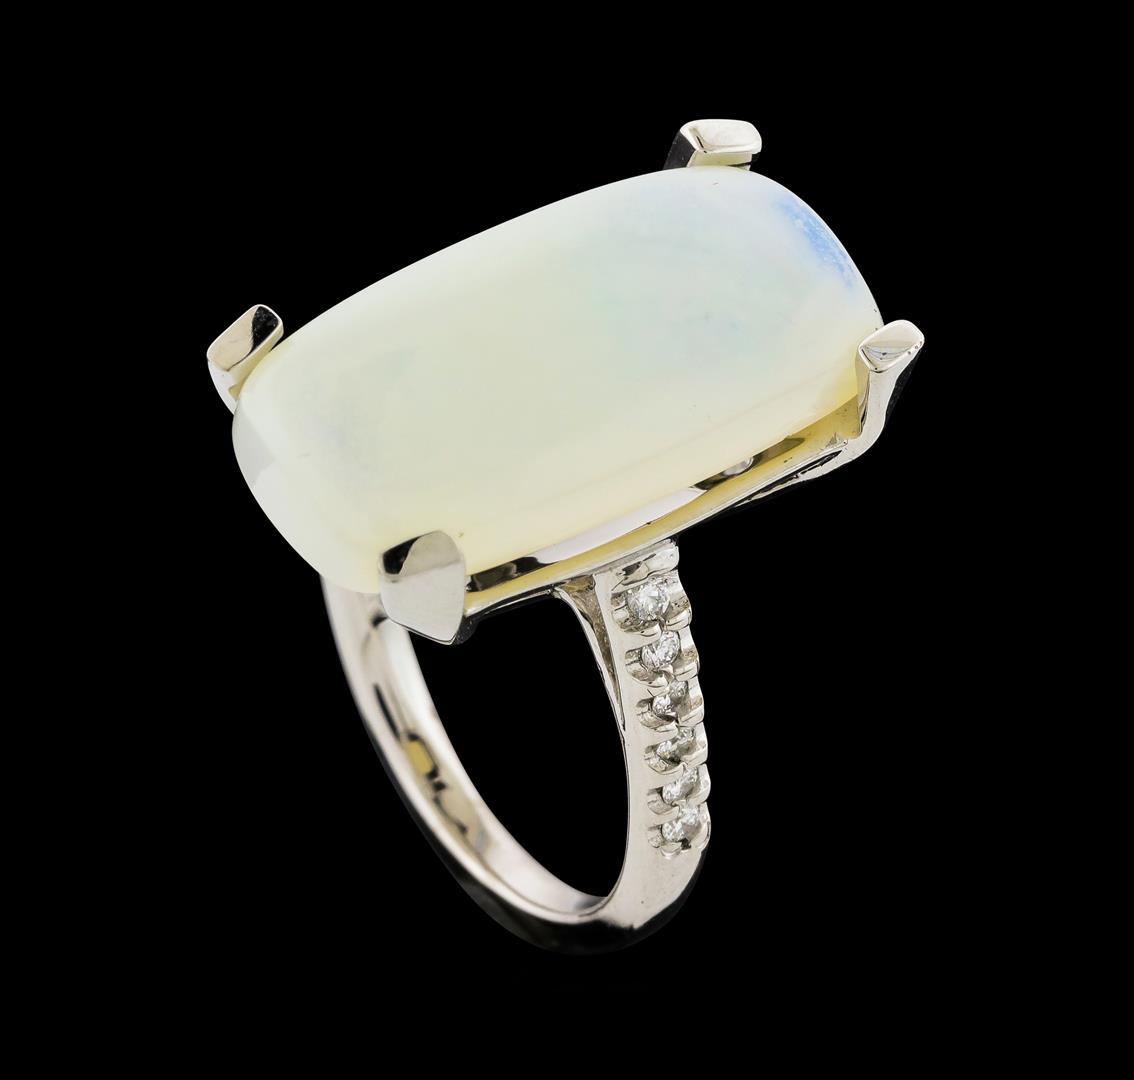 7.50 ctw Opal and Diamond Ring - 14KT White Gold